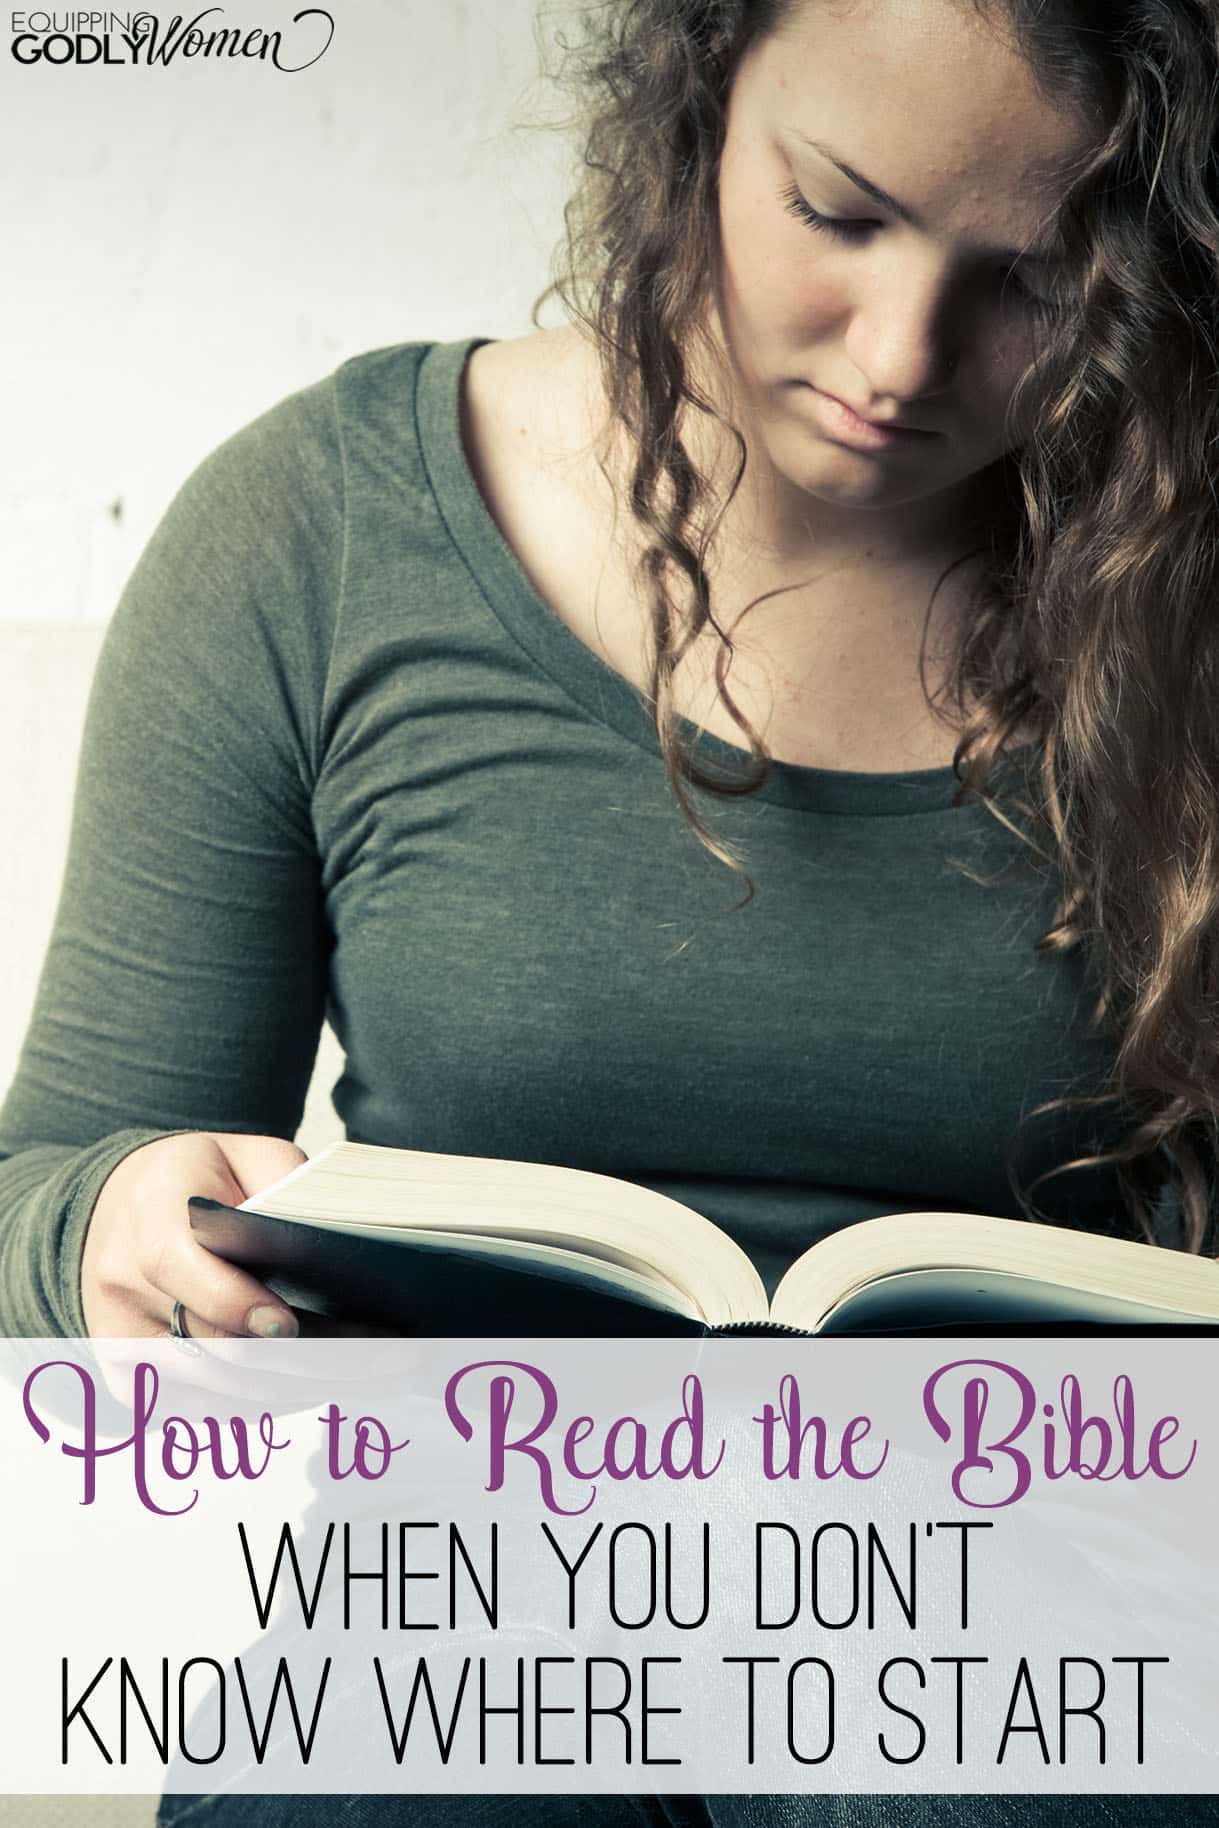 how-to-read-the-bible-easy-instructions-for-beginners